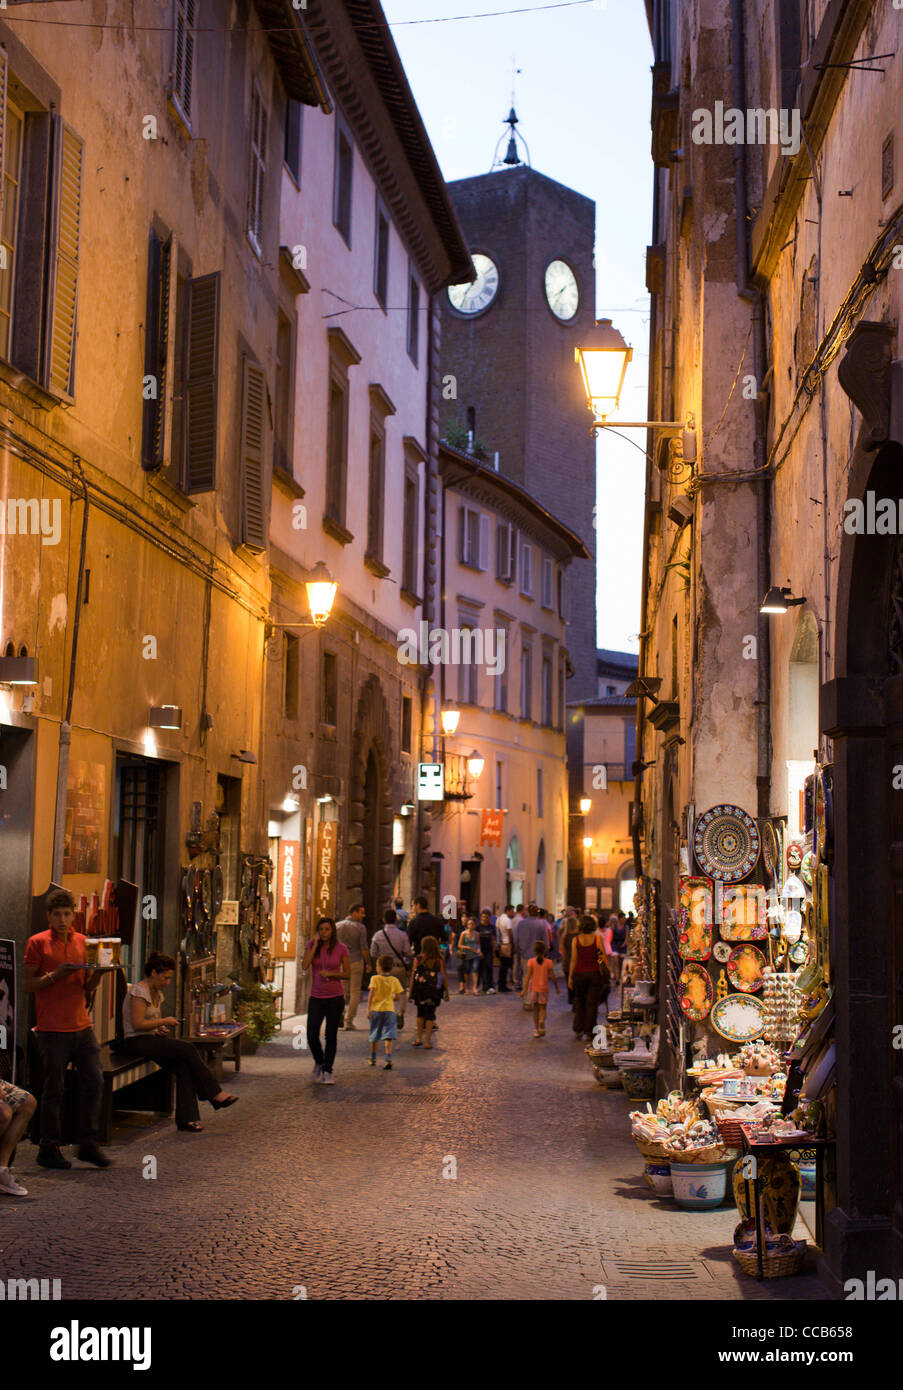 The streets of Orvieto in the evening. Italy. Stock Photo